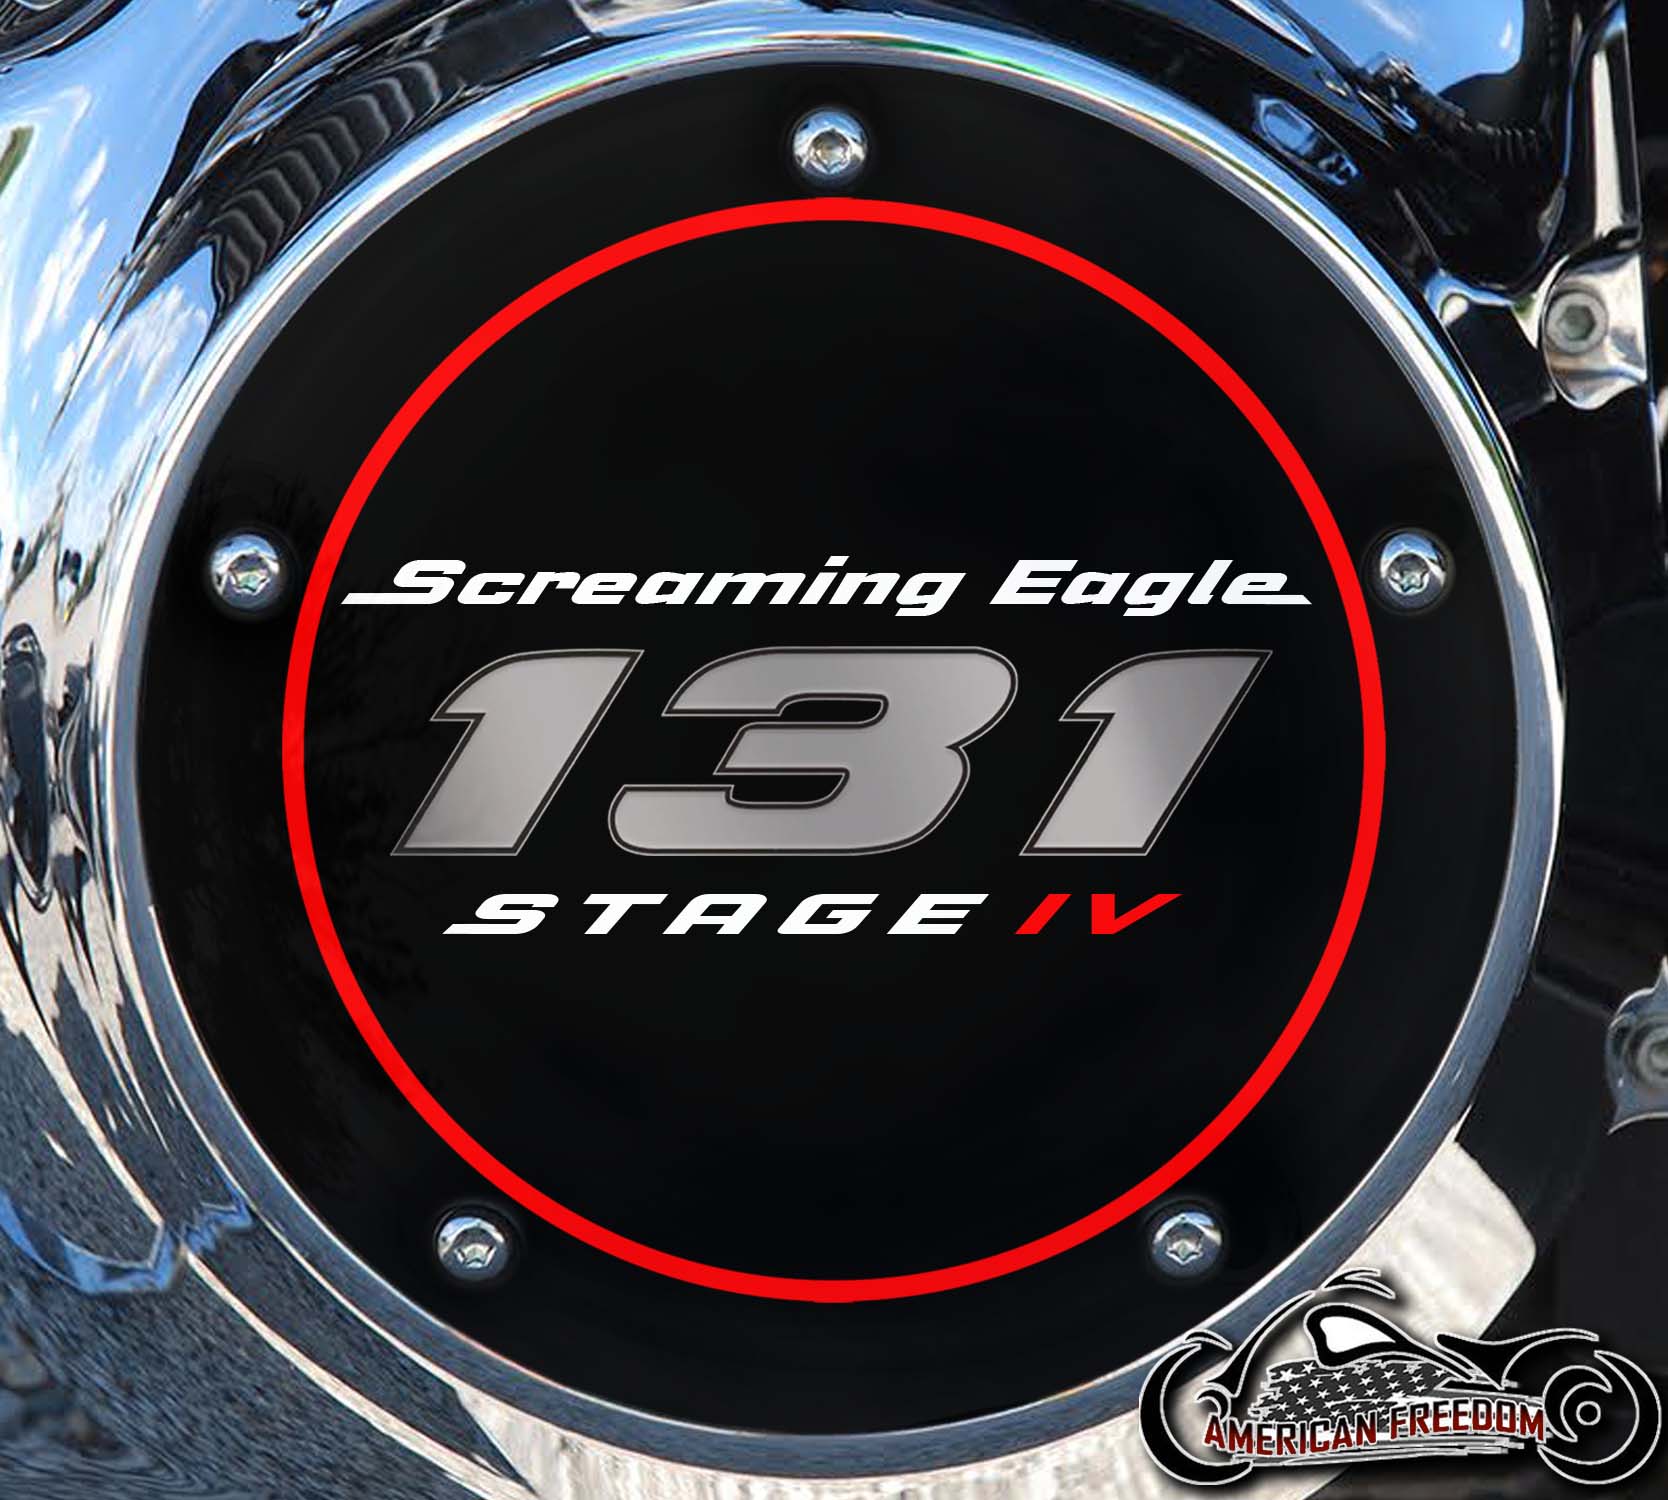 Screaming Eagle Stage IV 131 Derby cover O/L